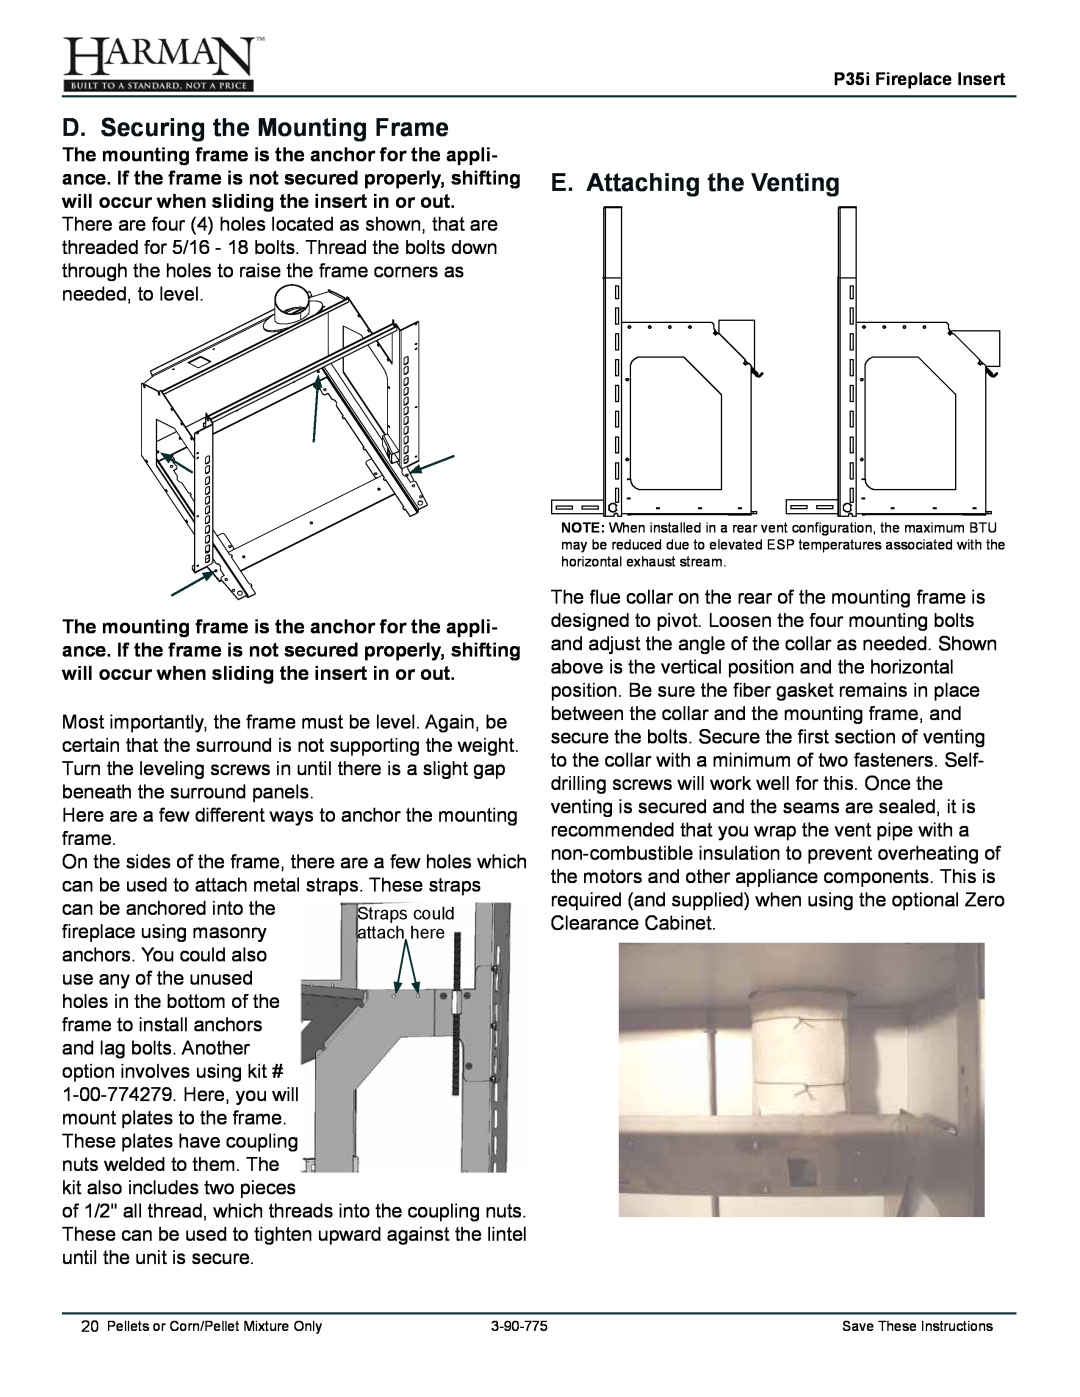 Harman Stove Company P35I owner manual D. Securing the Mounting Frame, E. Attaching the Venting 